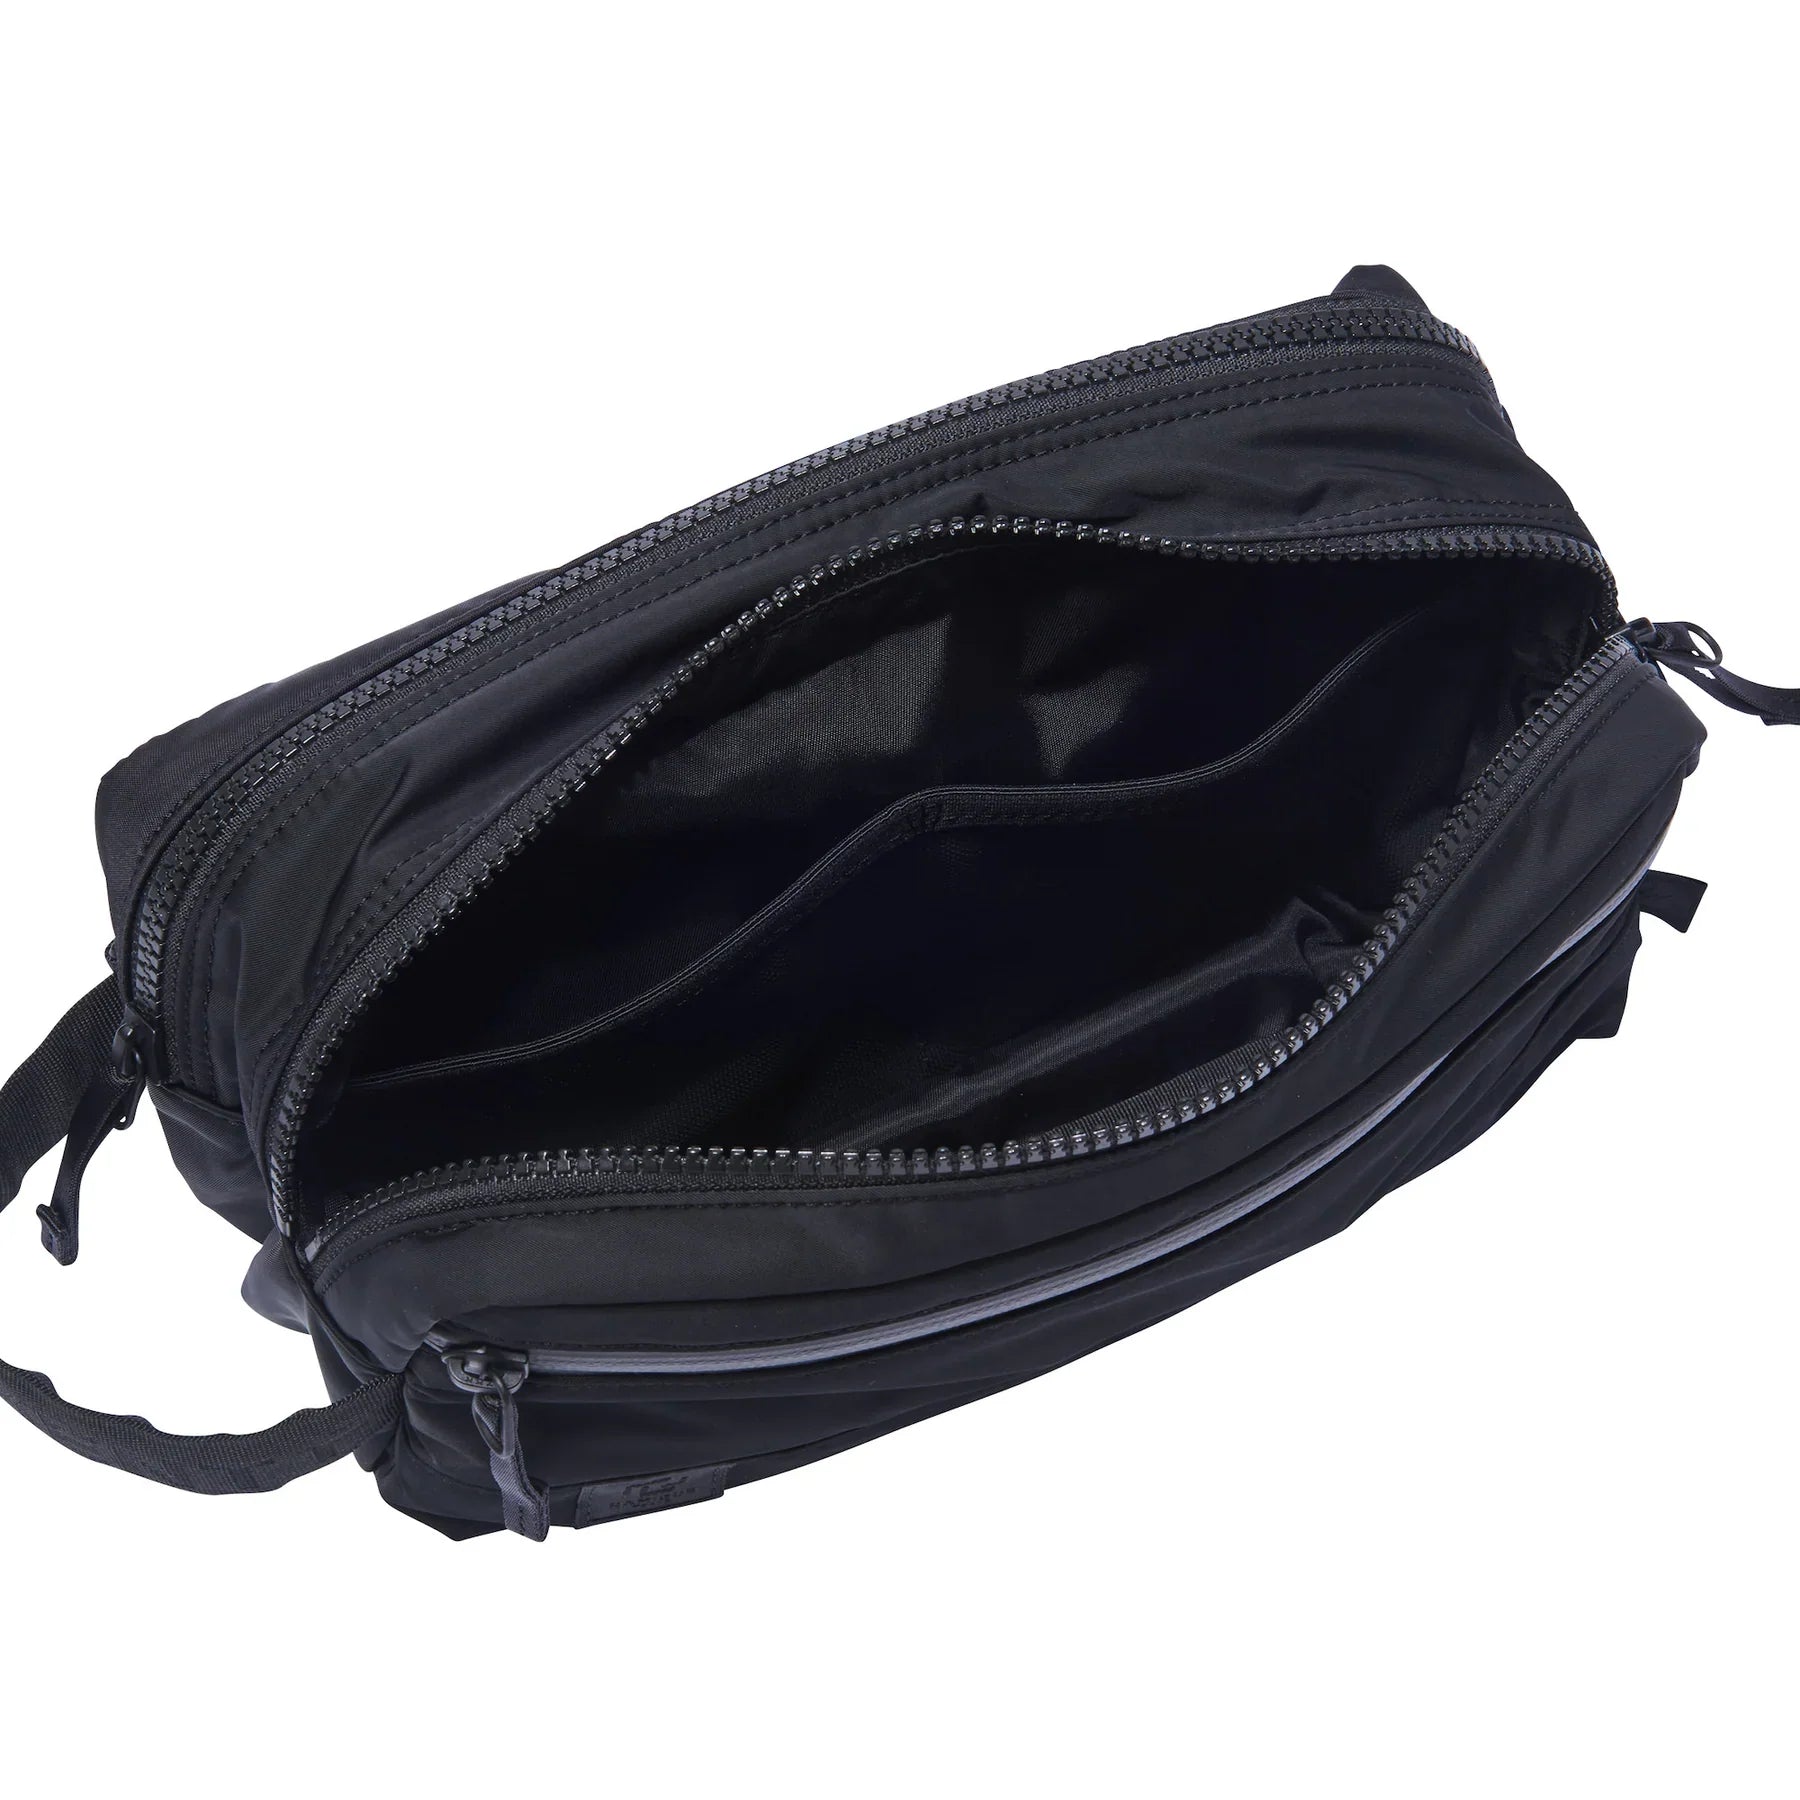 RAMIDUS / “BLACK BEAUTY by fragment” GROOMING POUCH (L)